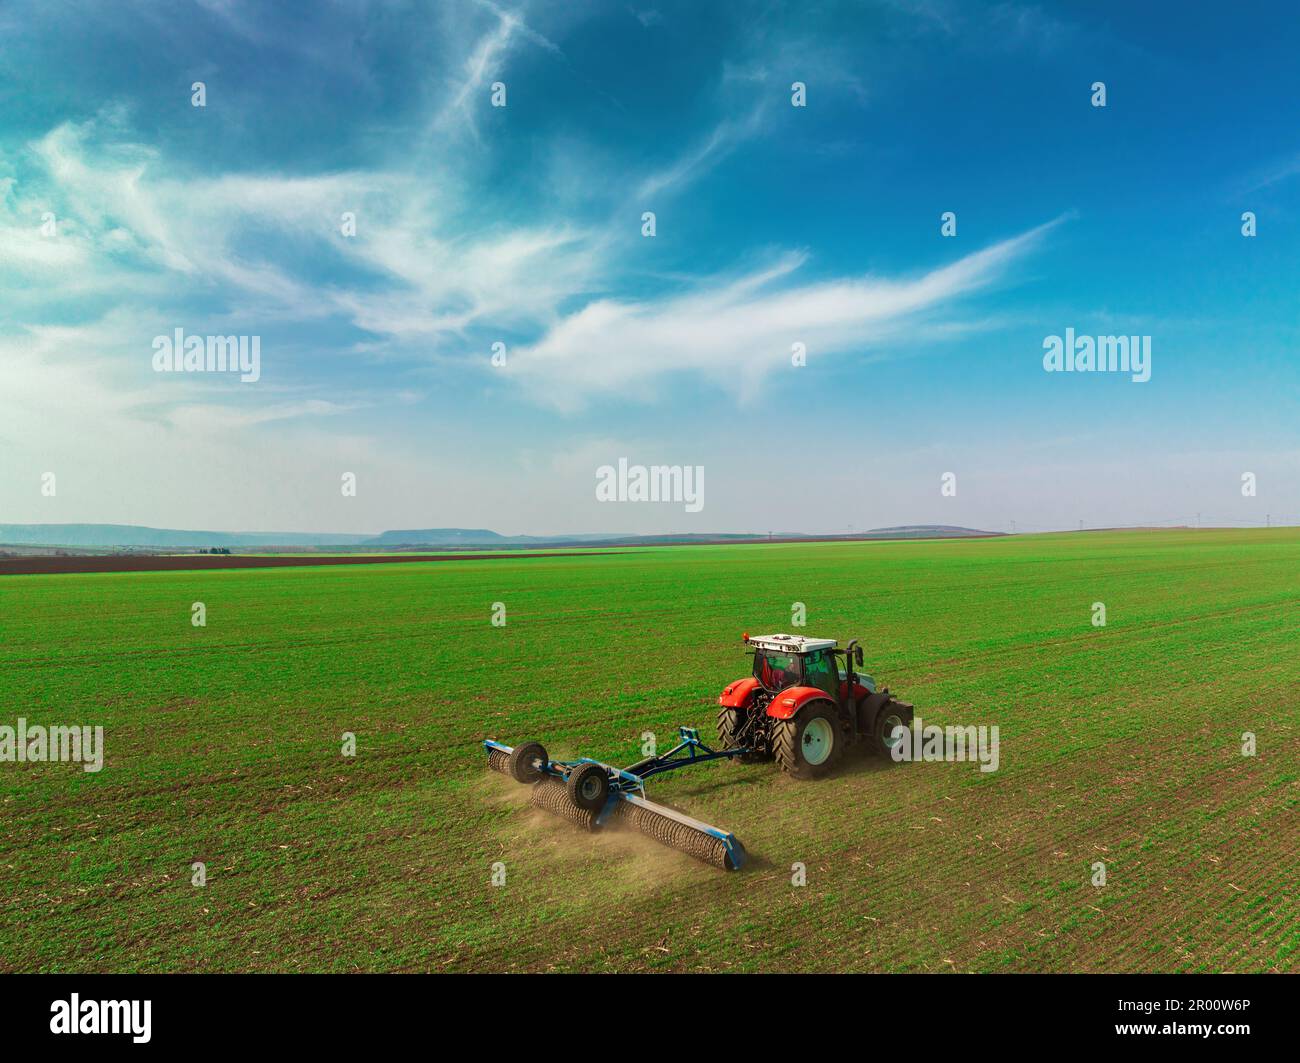 Land Preparation With Tractor, Tractor Plows A Field, Agriculture Modern  Method Stock Photo, Picture and Royalty Free Image. Image 20428550.